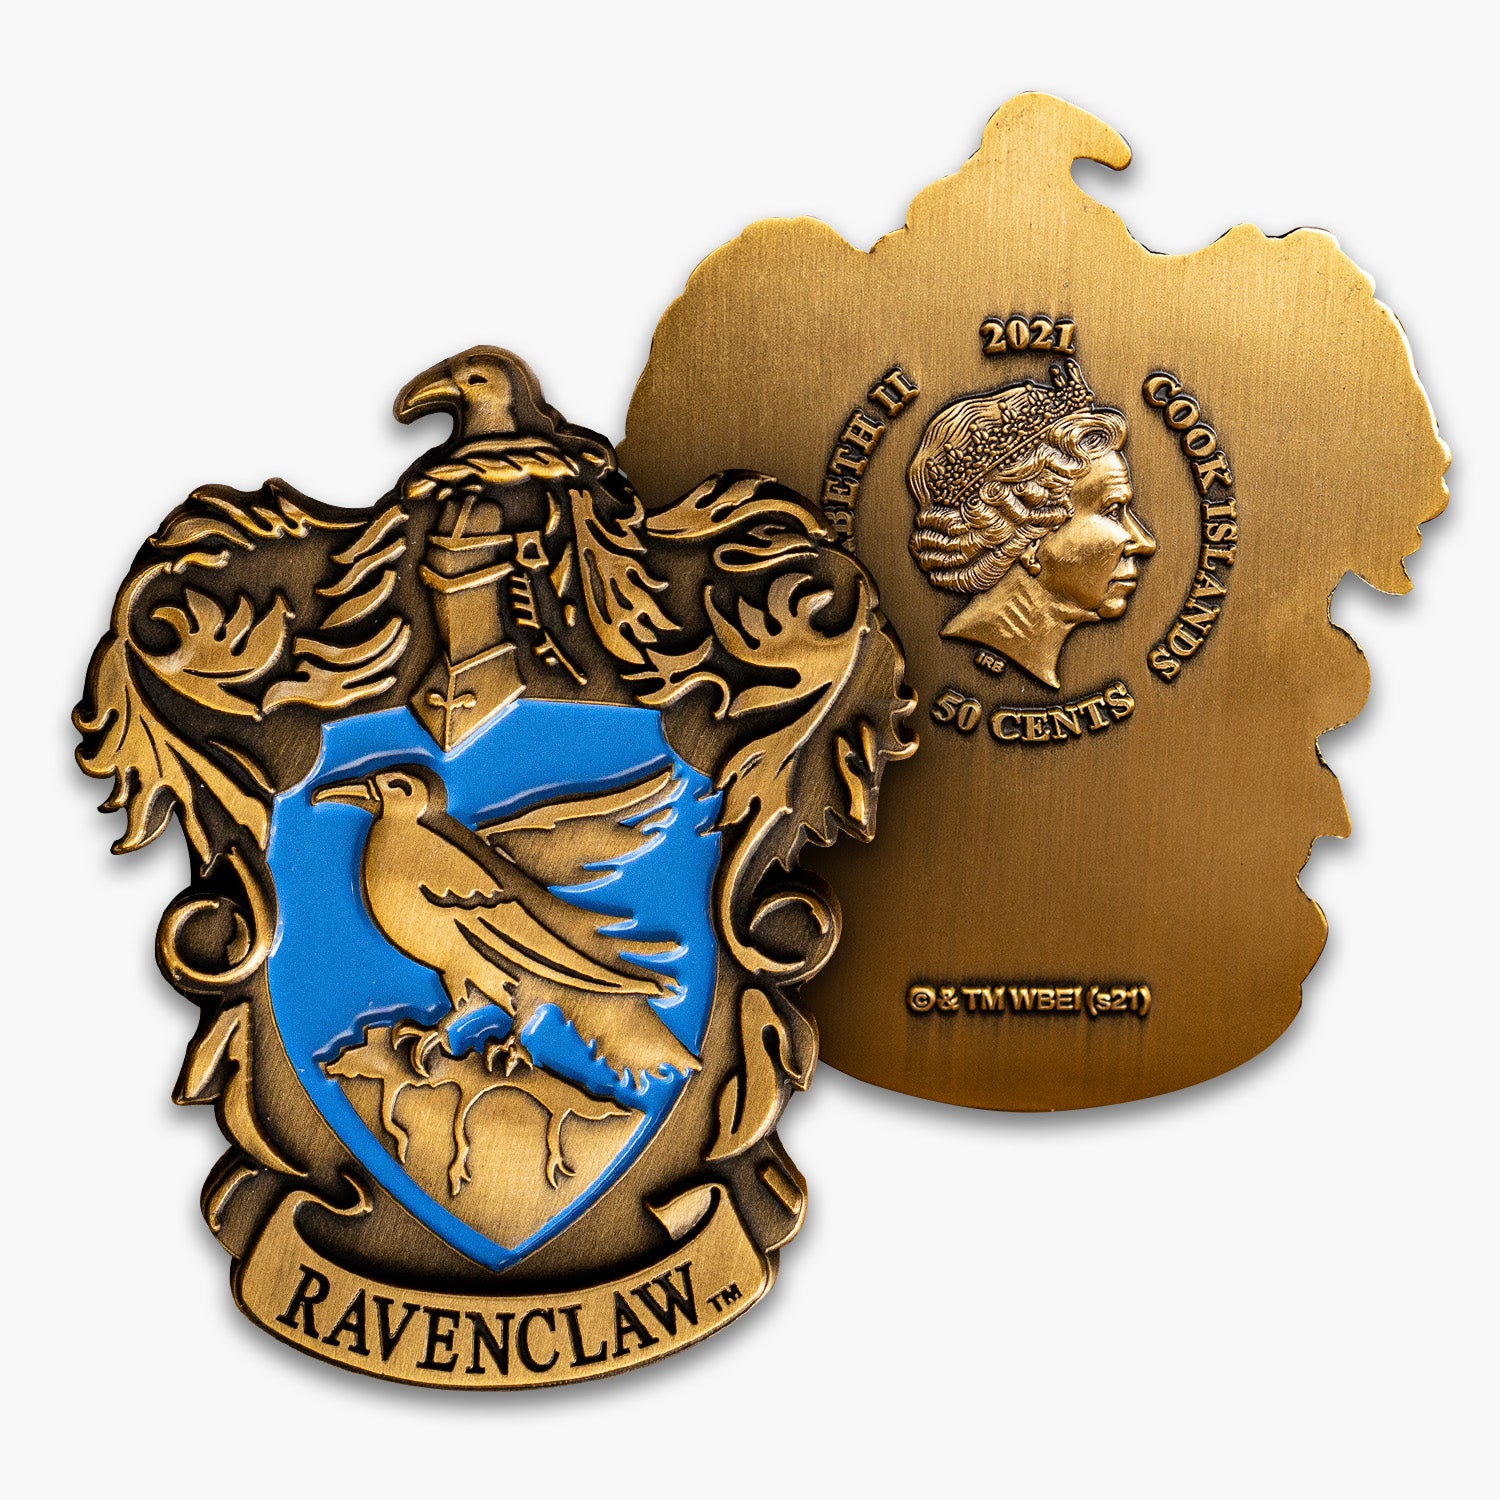 The Official Harry Potter Ravenclaw House Crest Shaped Coin